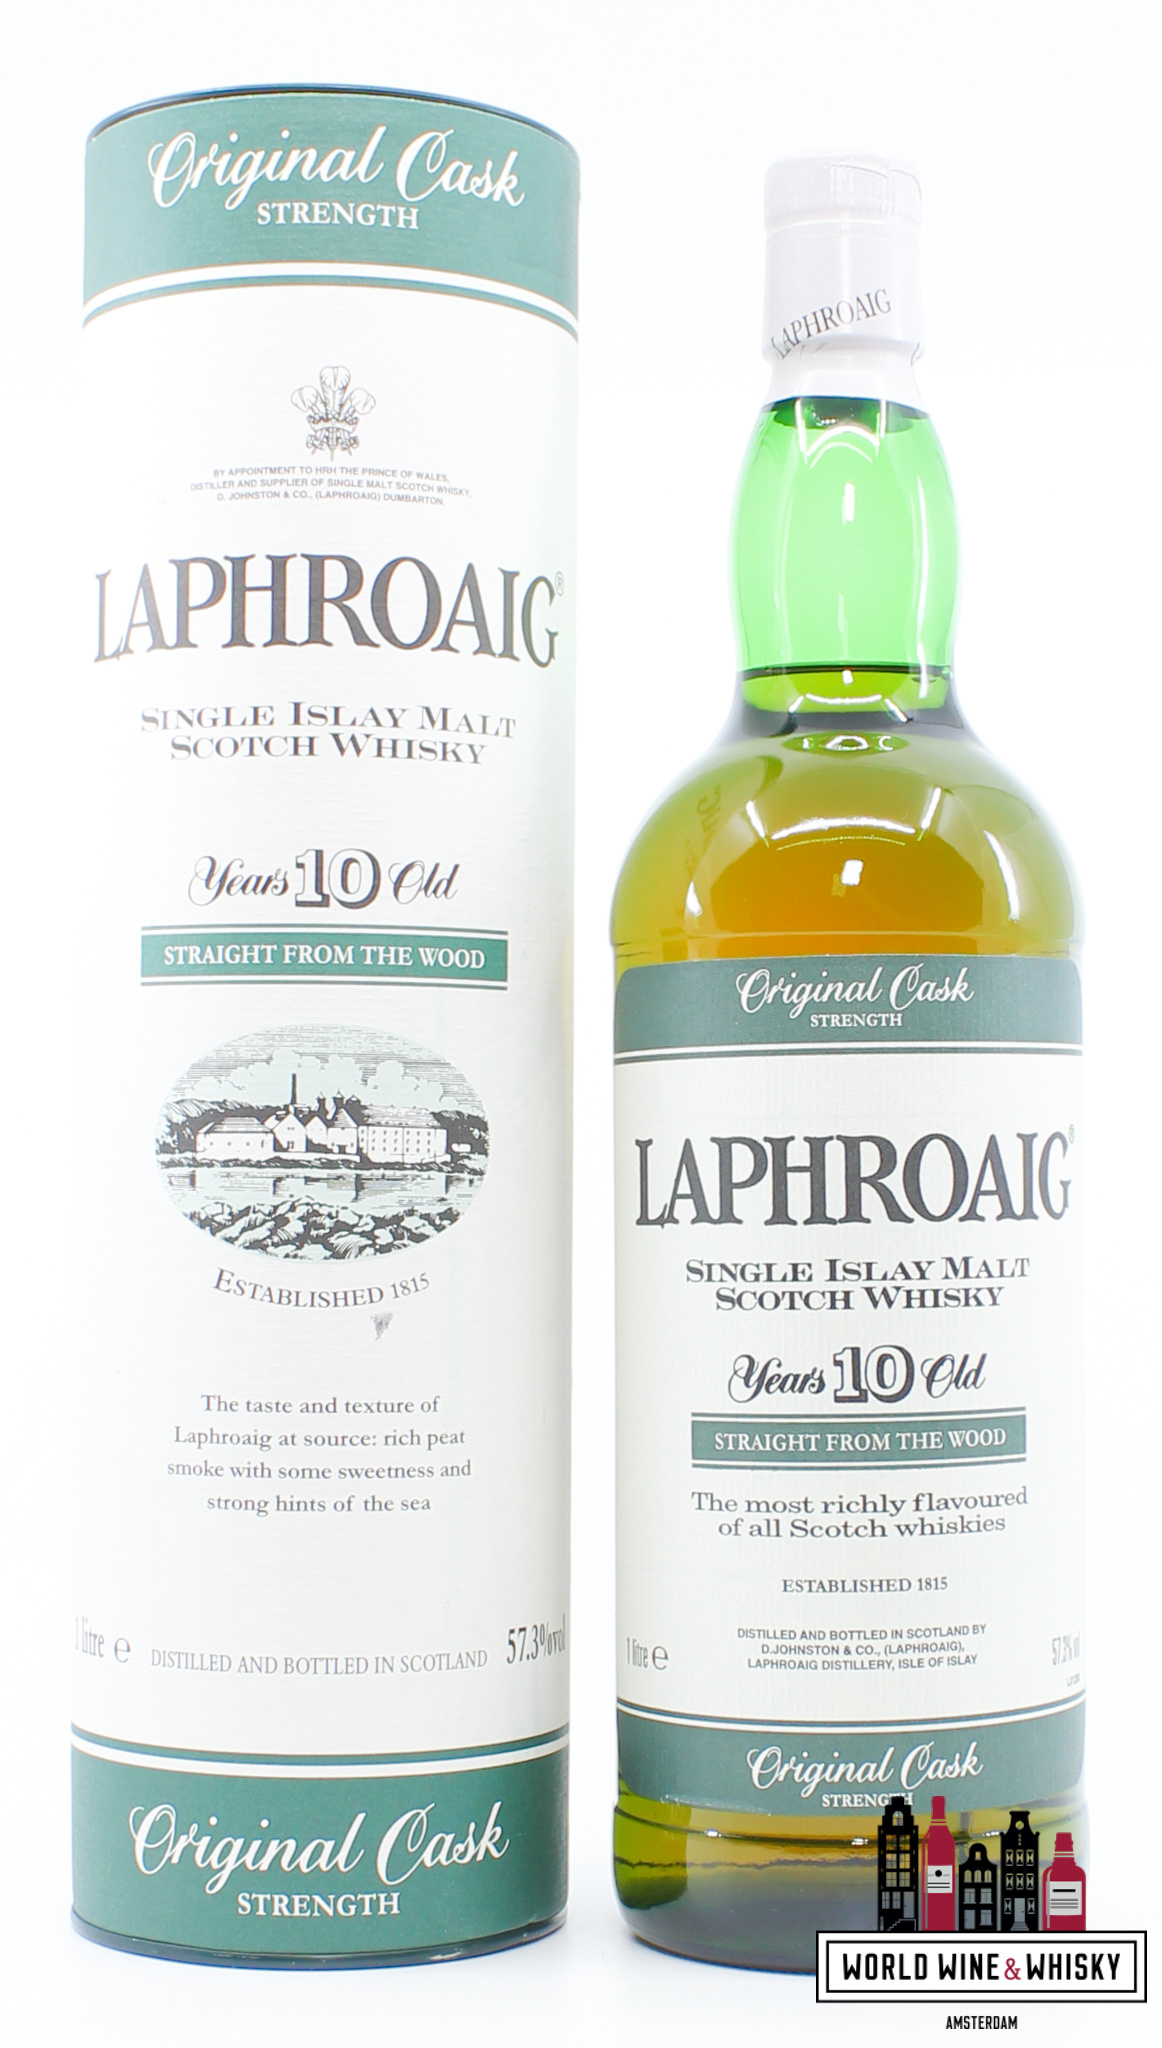 Laphroaig Laphroaig 10 Years Old 2000 - Original Cask Strength - Straight from the Wood 57.3% (1 liter)